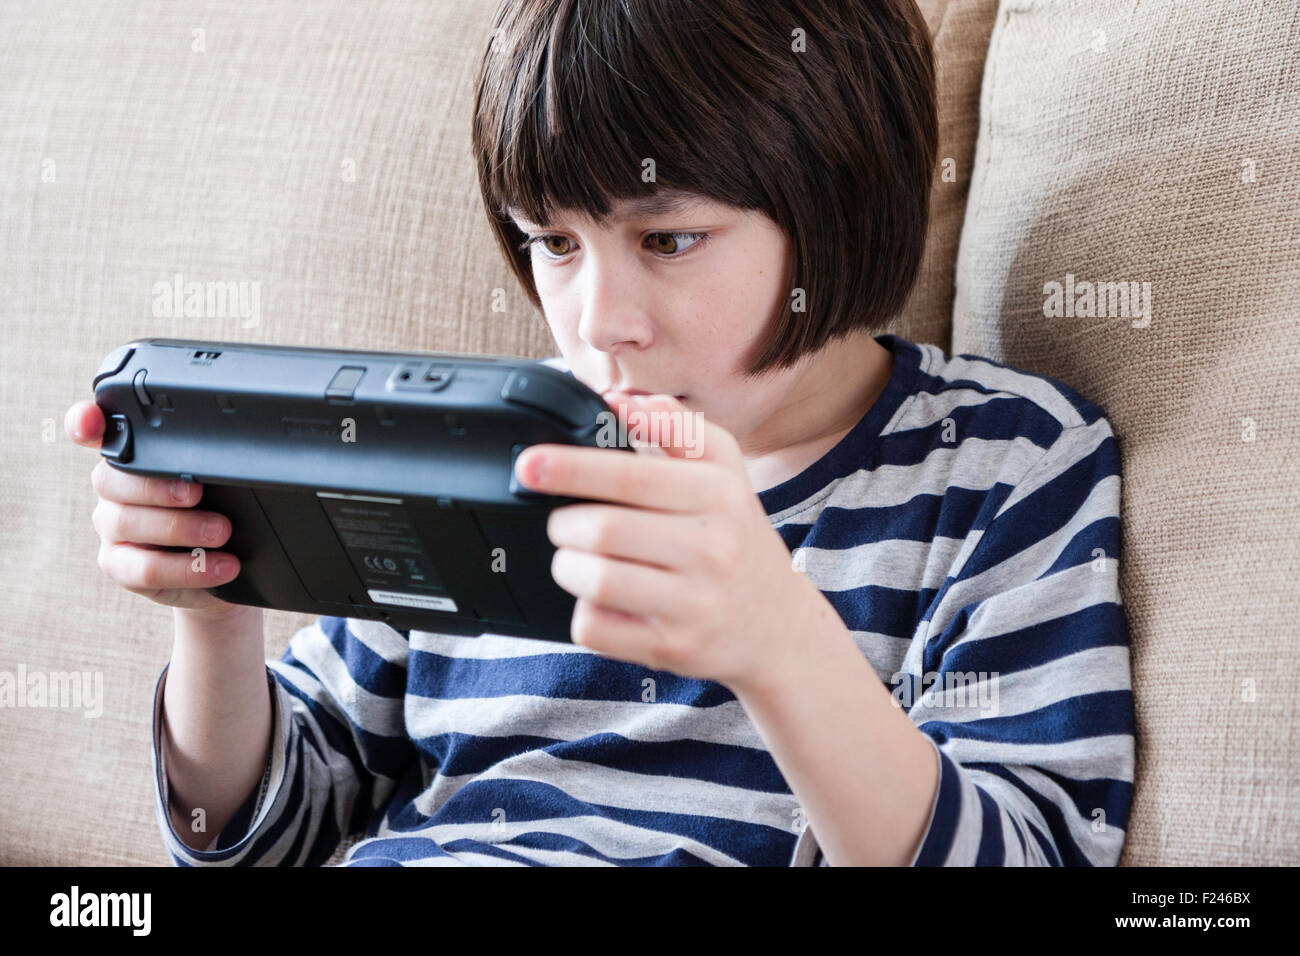 Male Caucasian child, boy, 10-12 year old, sitting holding a  Nintendo wii game console in both hands concentrating, head and shoulder side view. Stock Photo